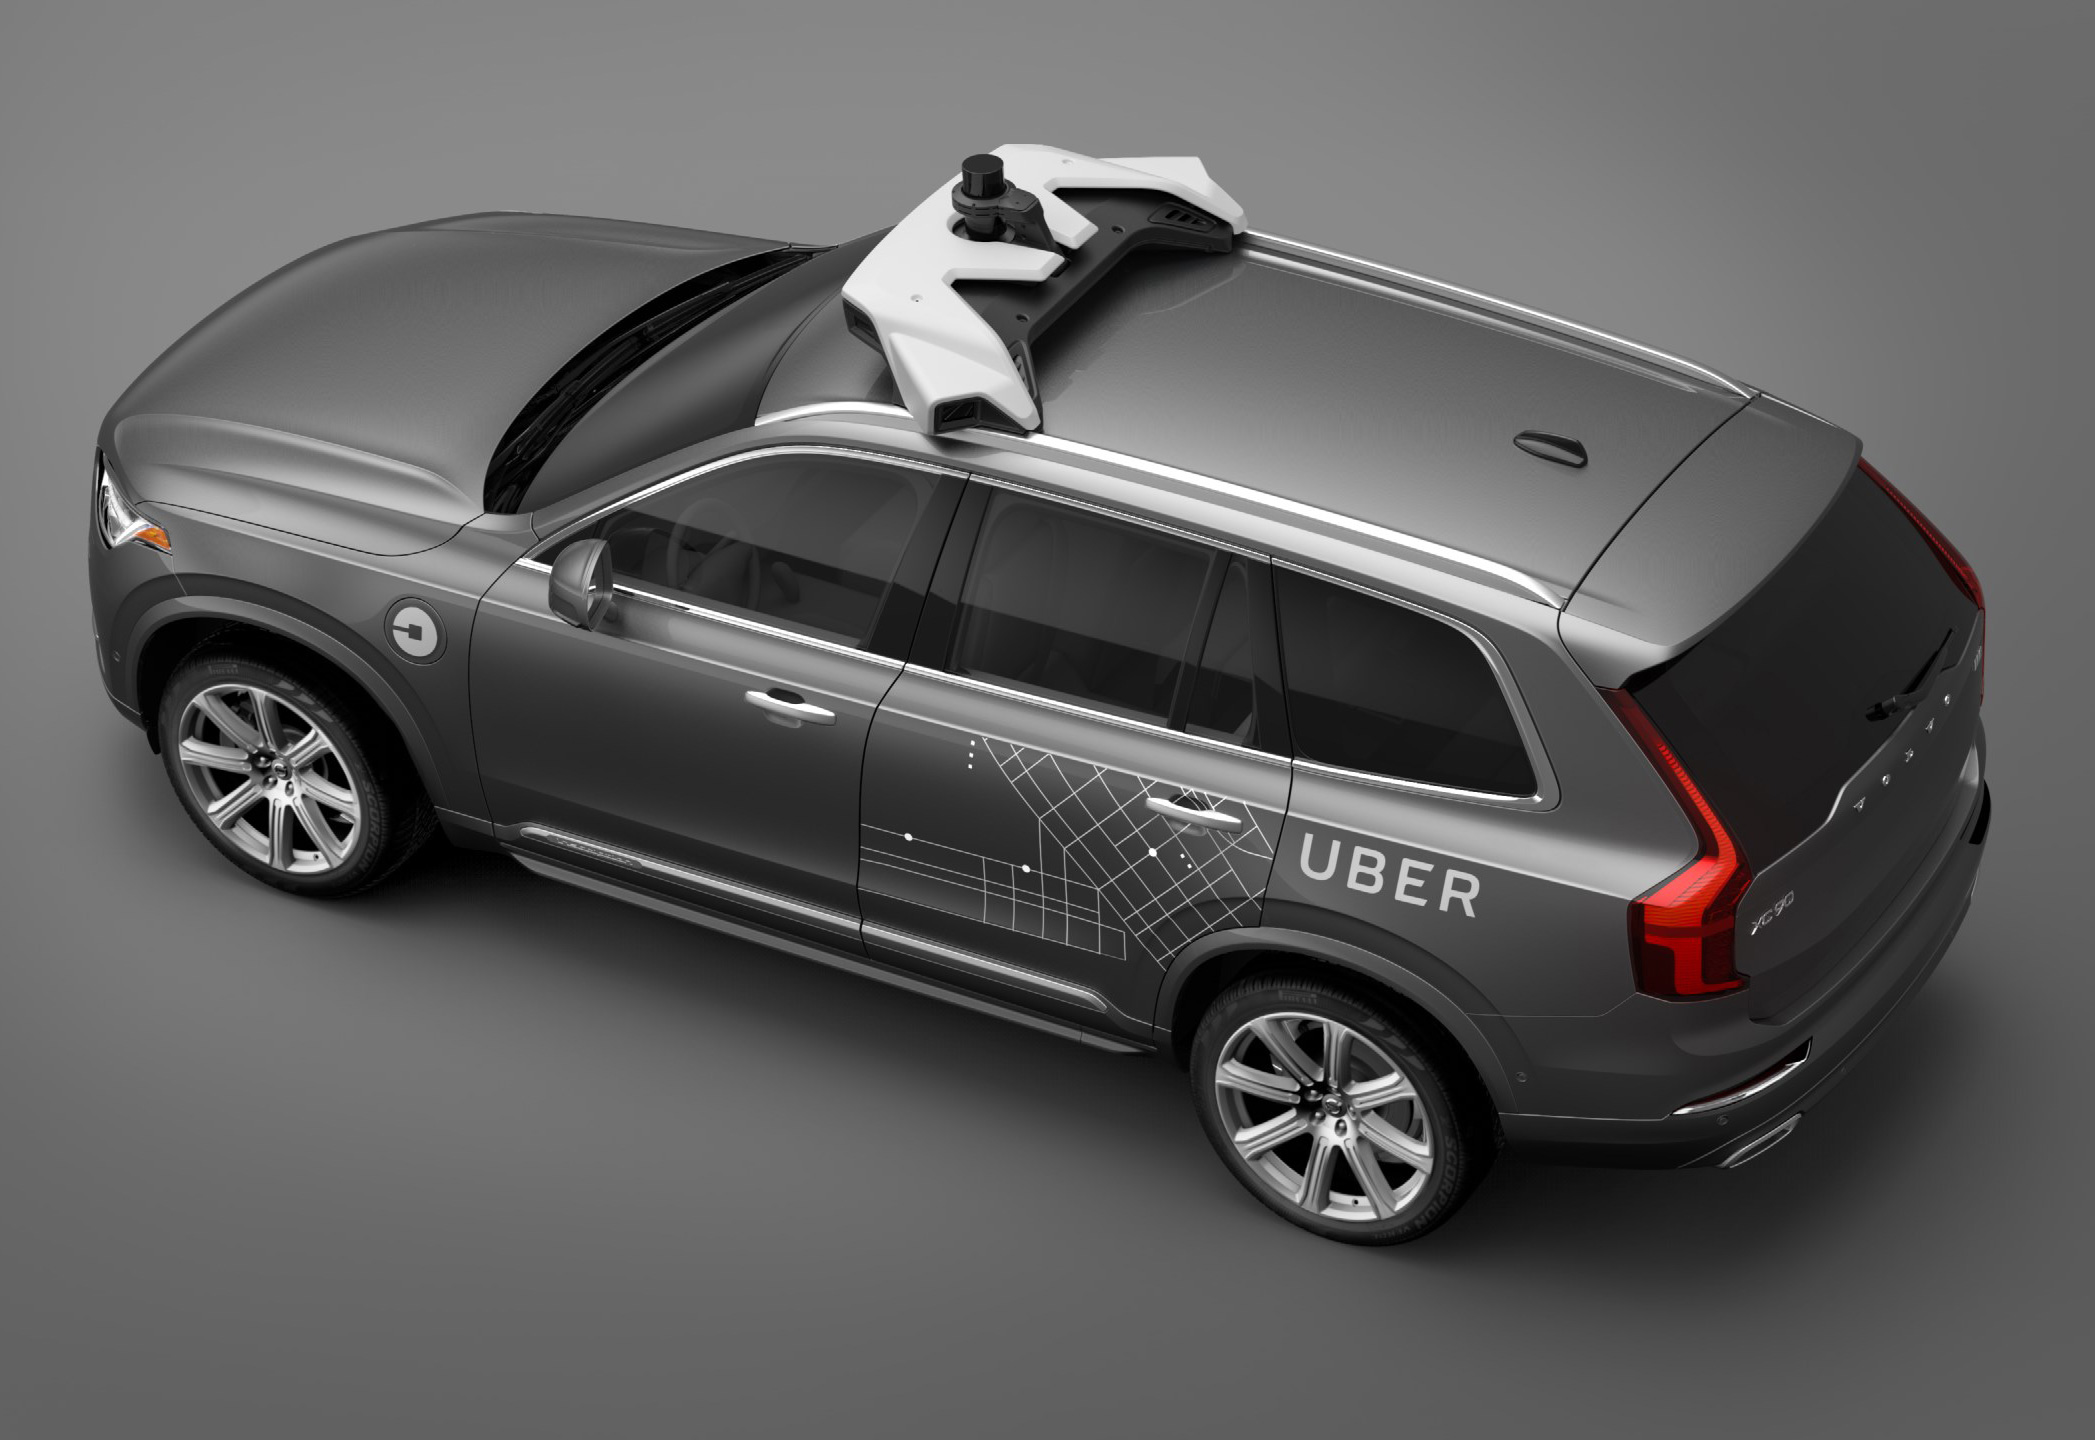 194851_Volvo_Cars_and_Uber_join_forces_to_develop_autonomous_driving_cars.jpg